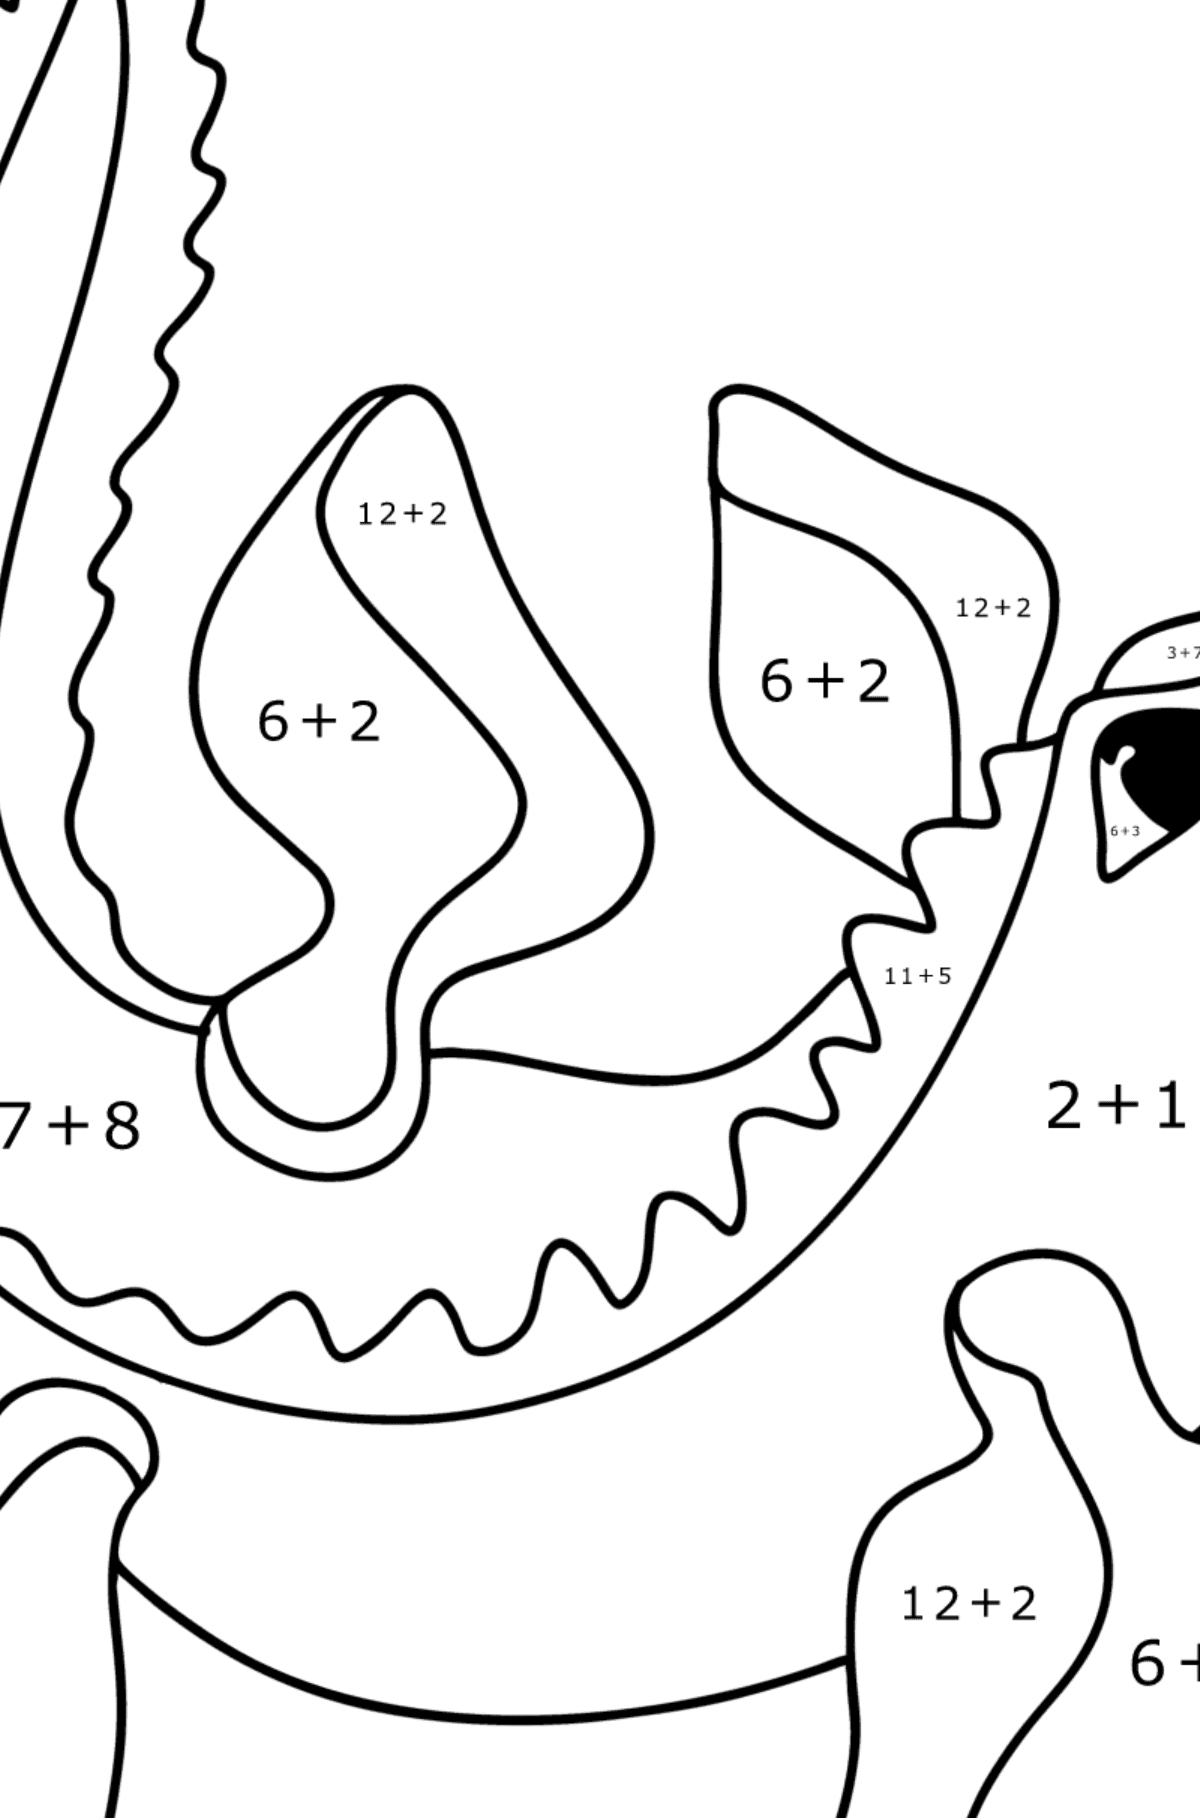 Mosasaurus coloring page - Math Coloring - Addition for Kids